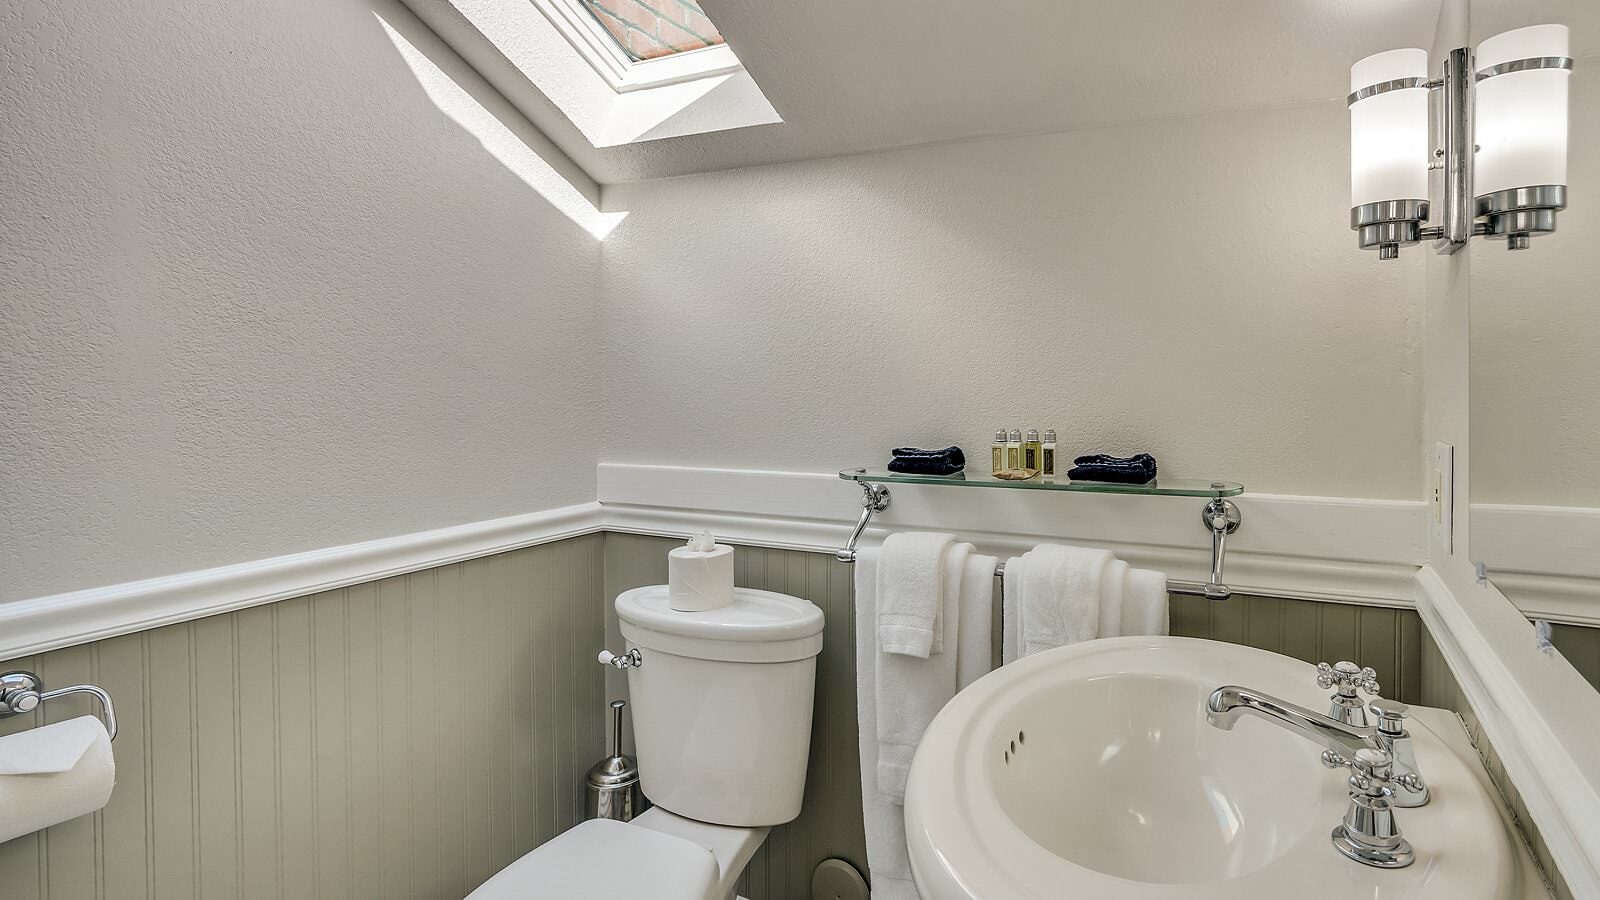 Bathroom with white walls, light gray wainscotting, white toilet and white sink